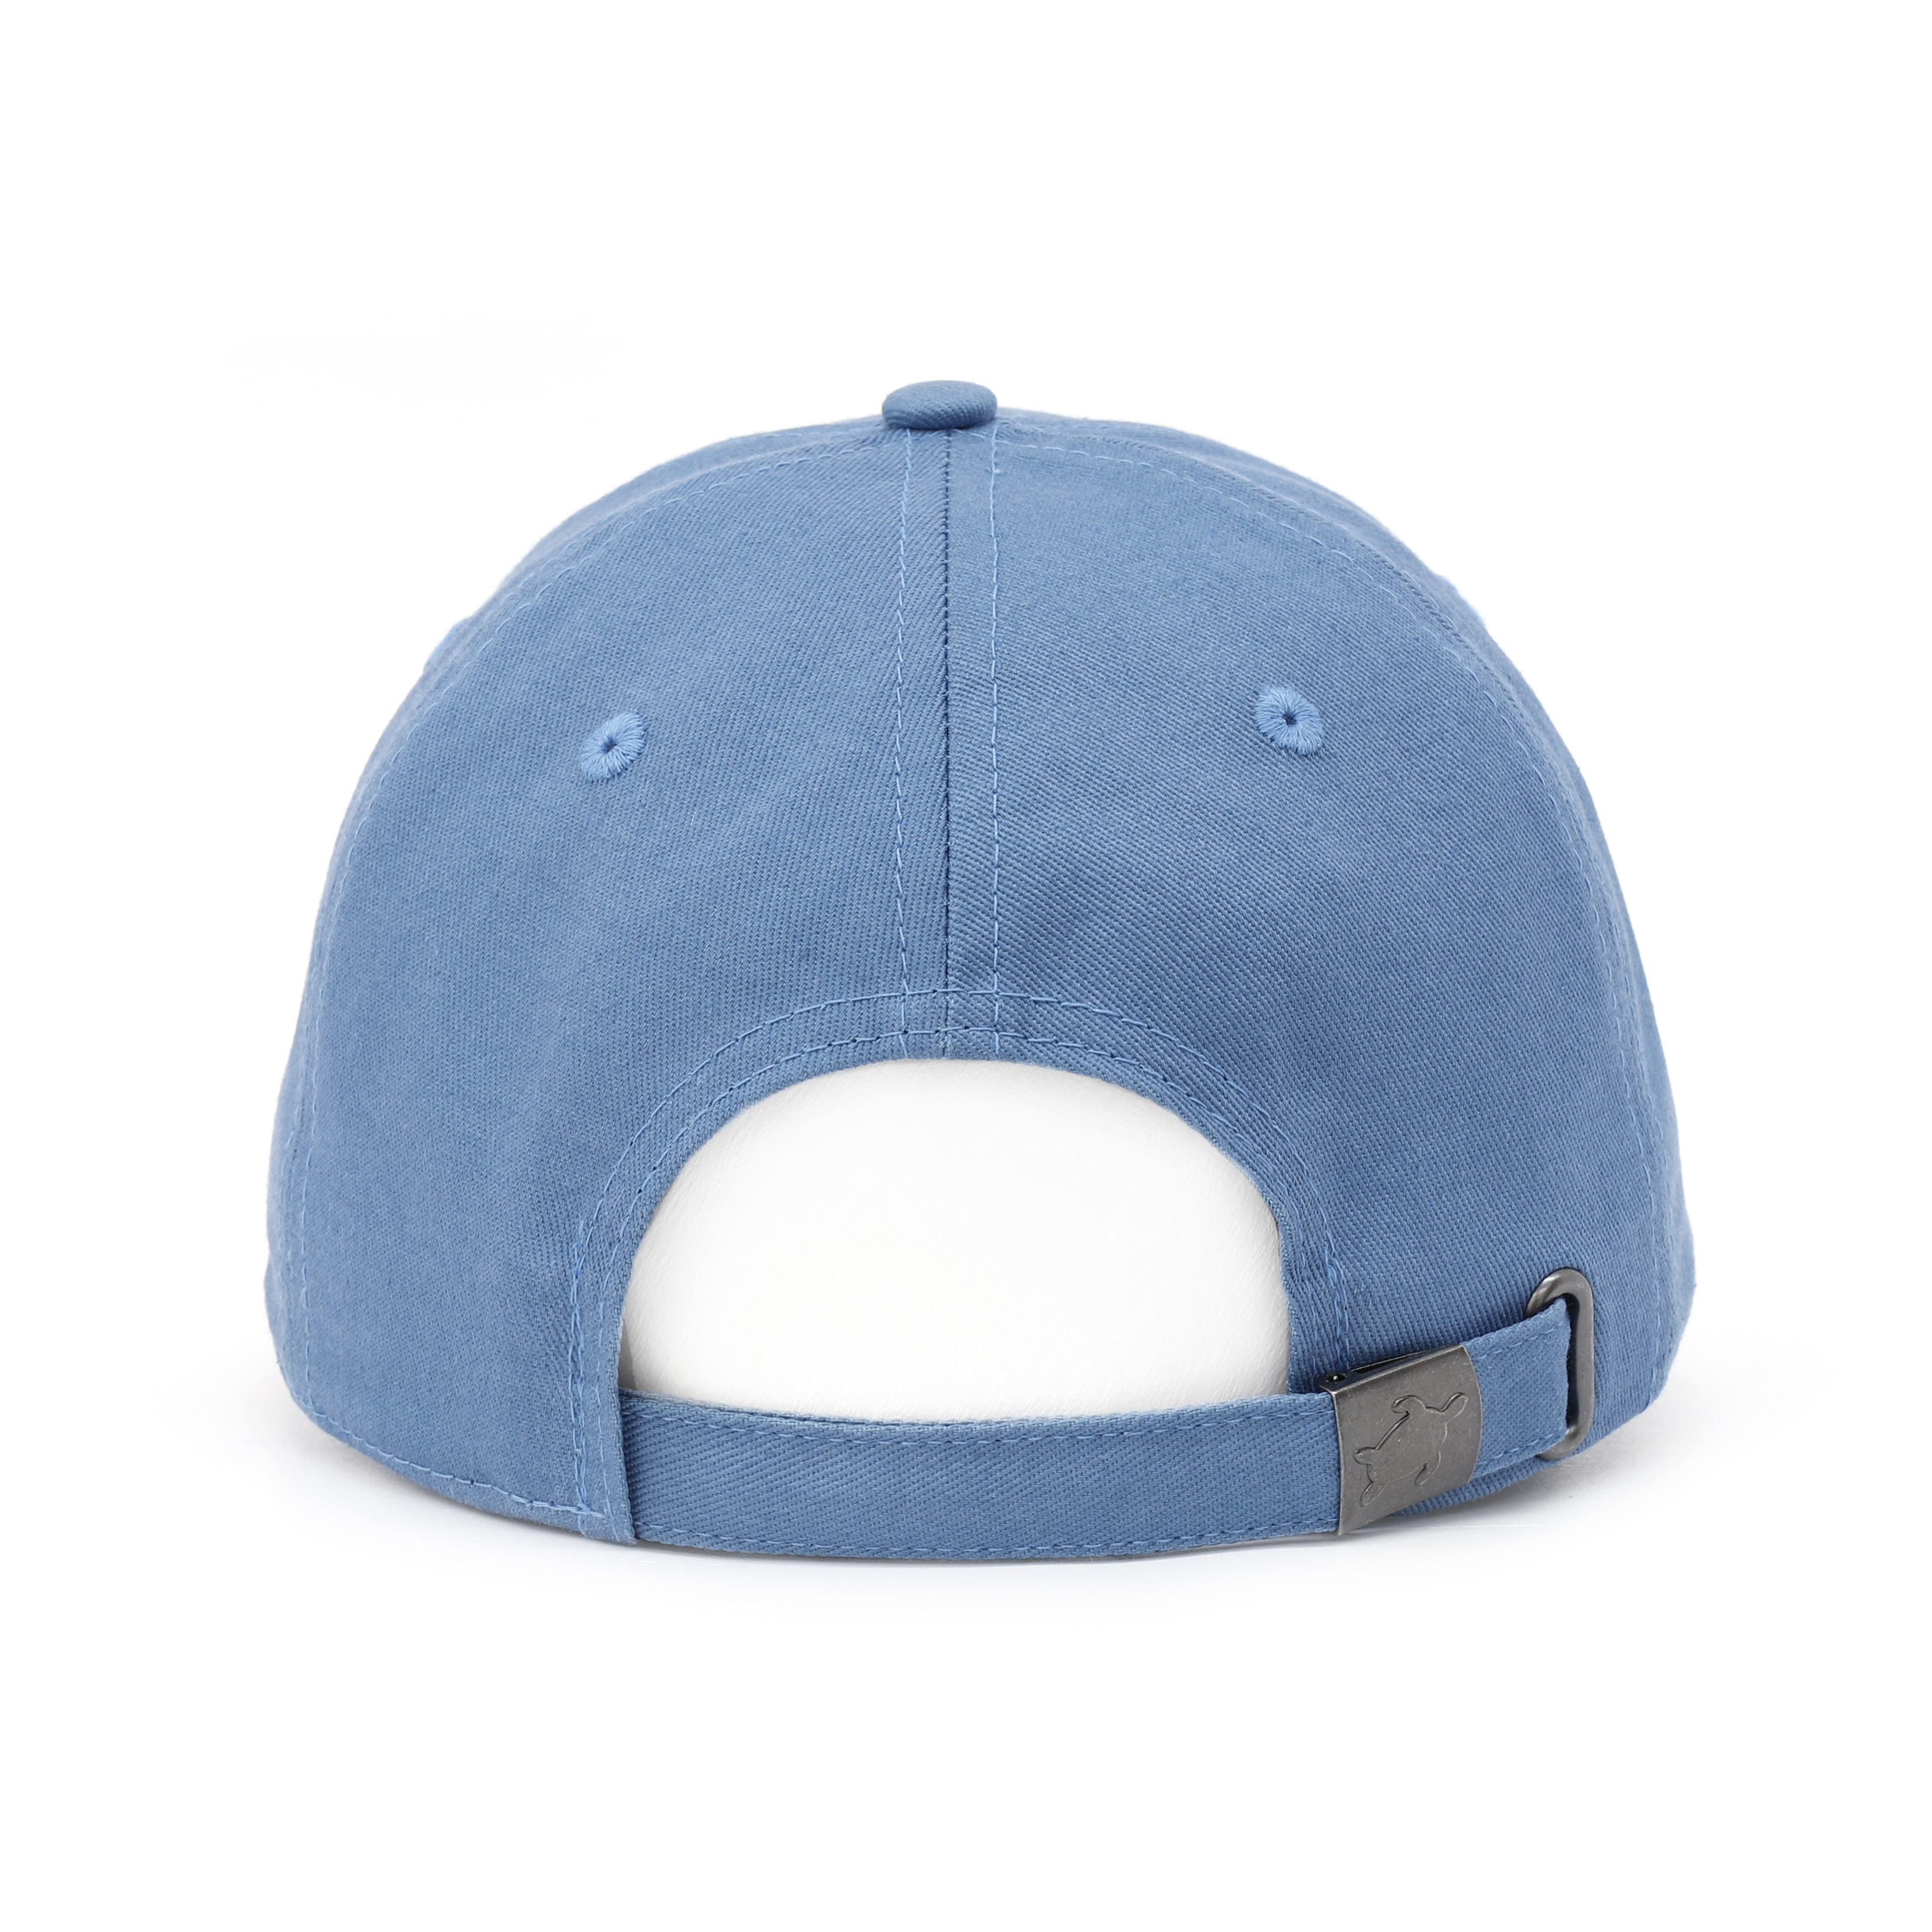 Smith & Miller Reno Unisex Curved Cap, dusty blue